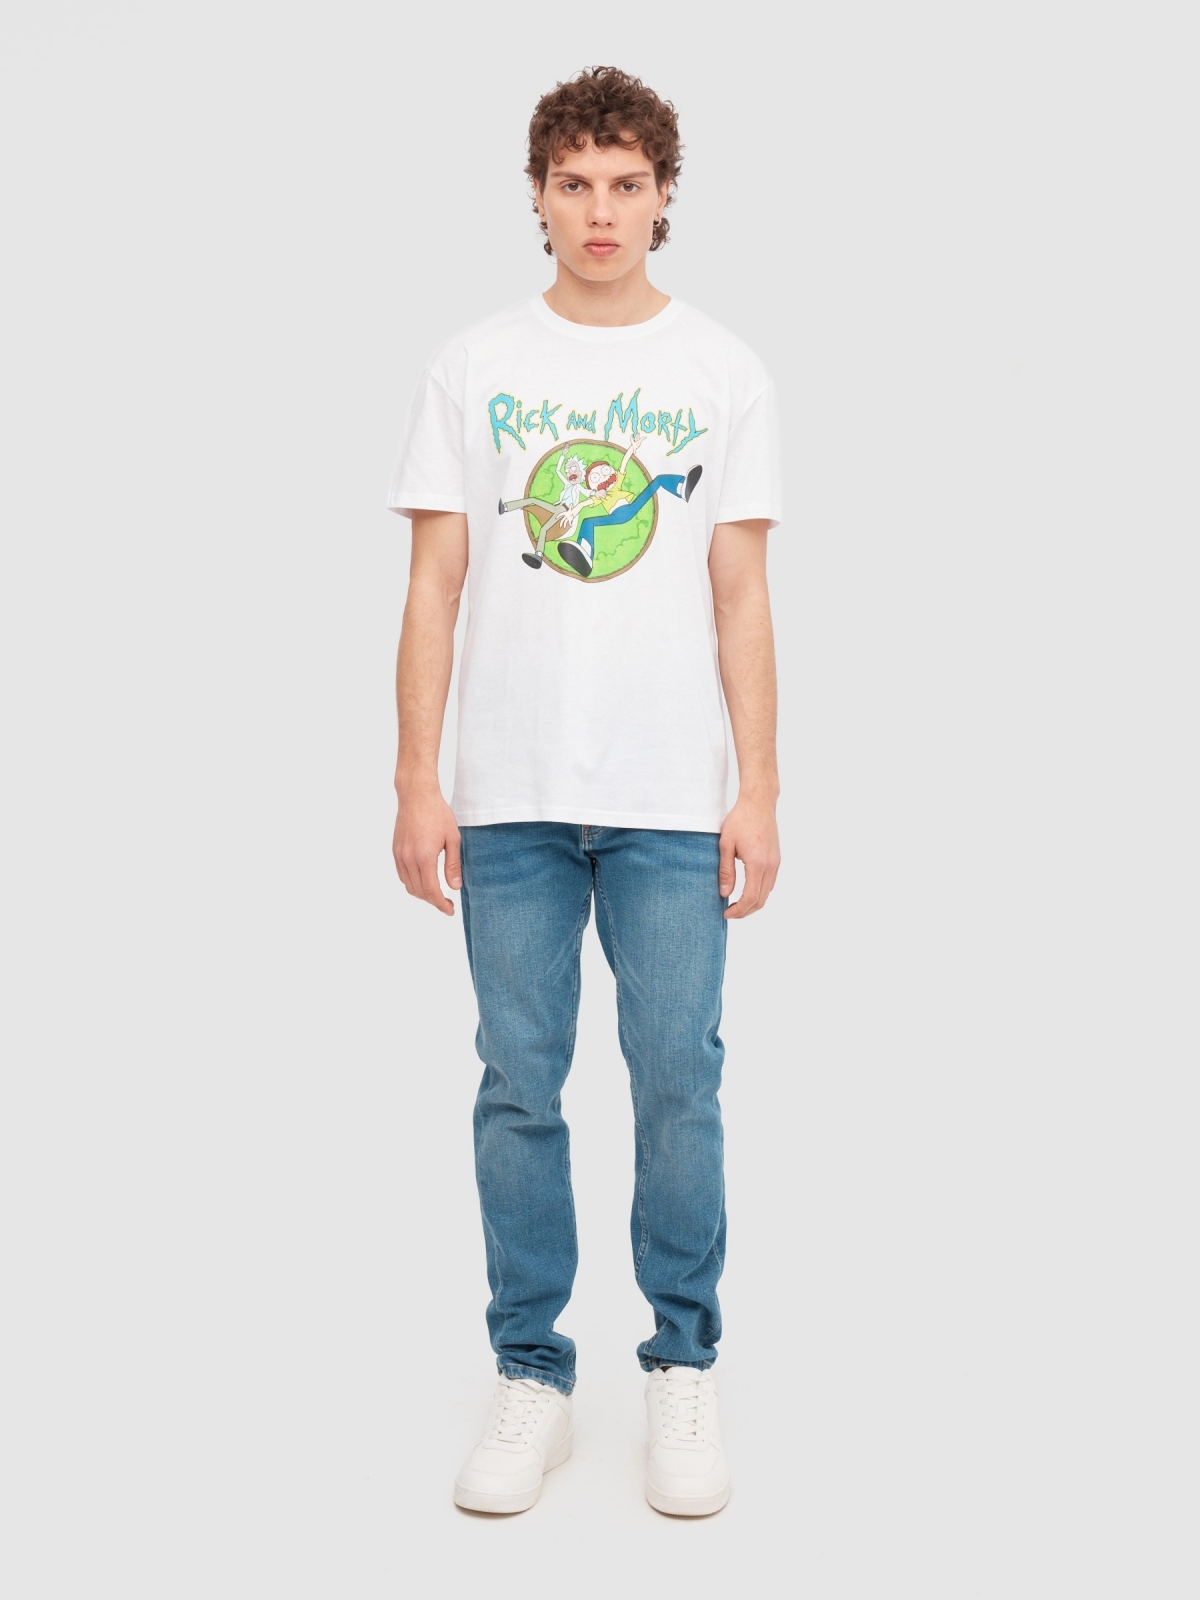 Rick and Morty t-shirt white front view